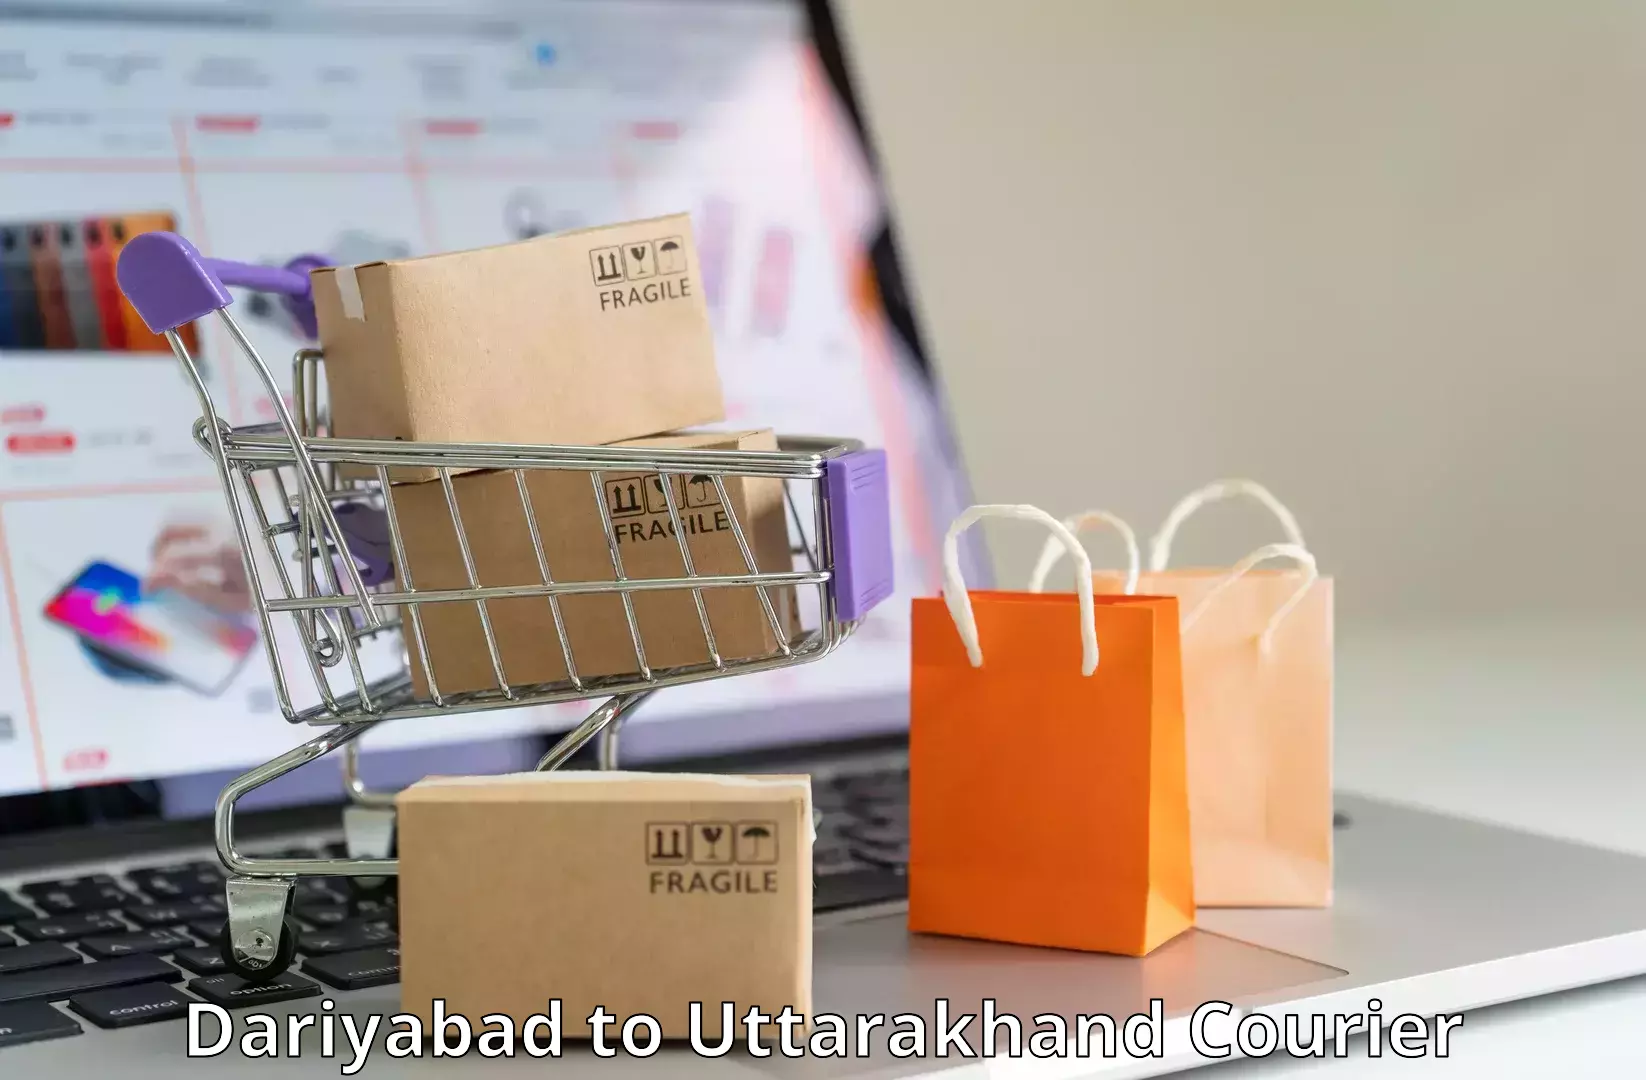 Easy access courier services Dariyabad to Haridwar